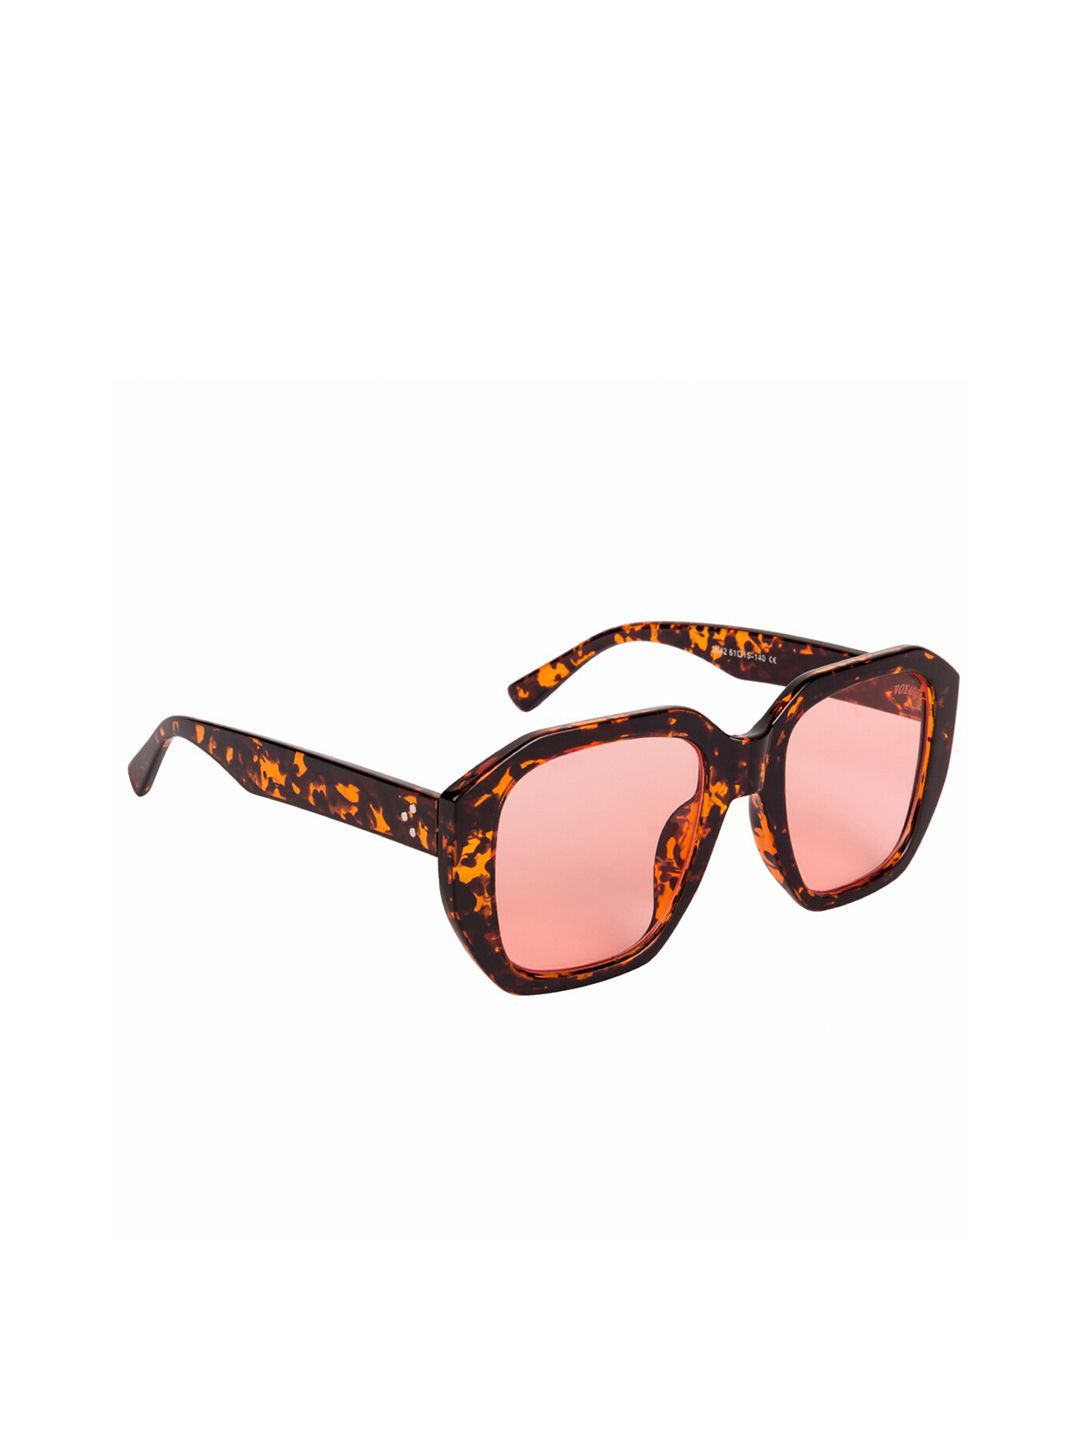 Voyage Adult Pink Lens & Brown Square Sunglasses with UV Protected Lens 2042MG2866Z Price in India